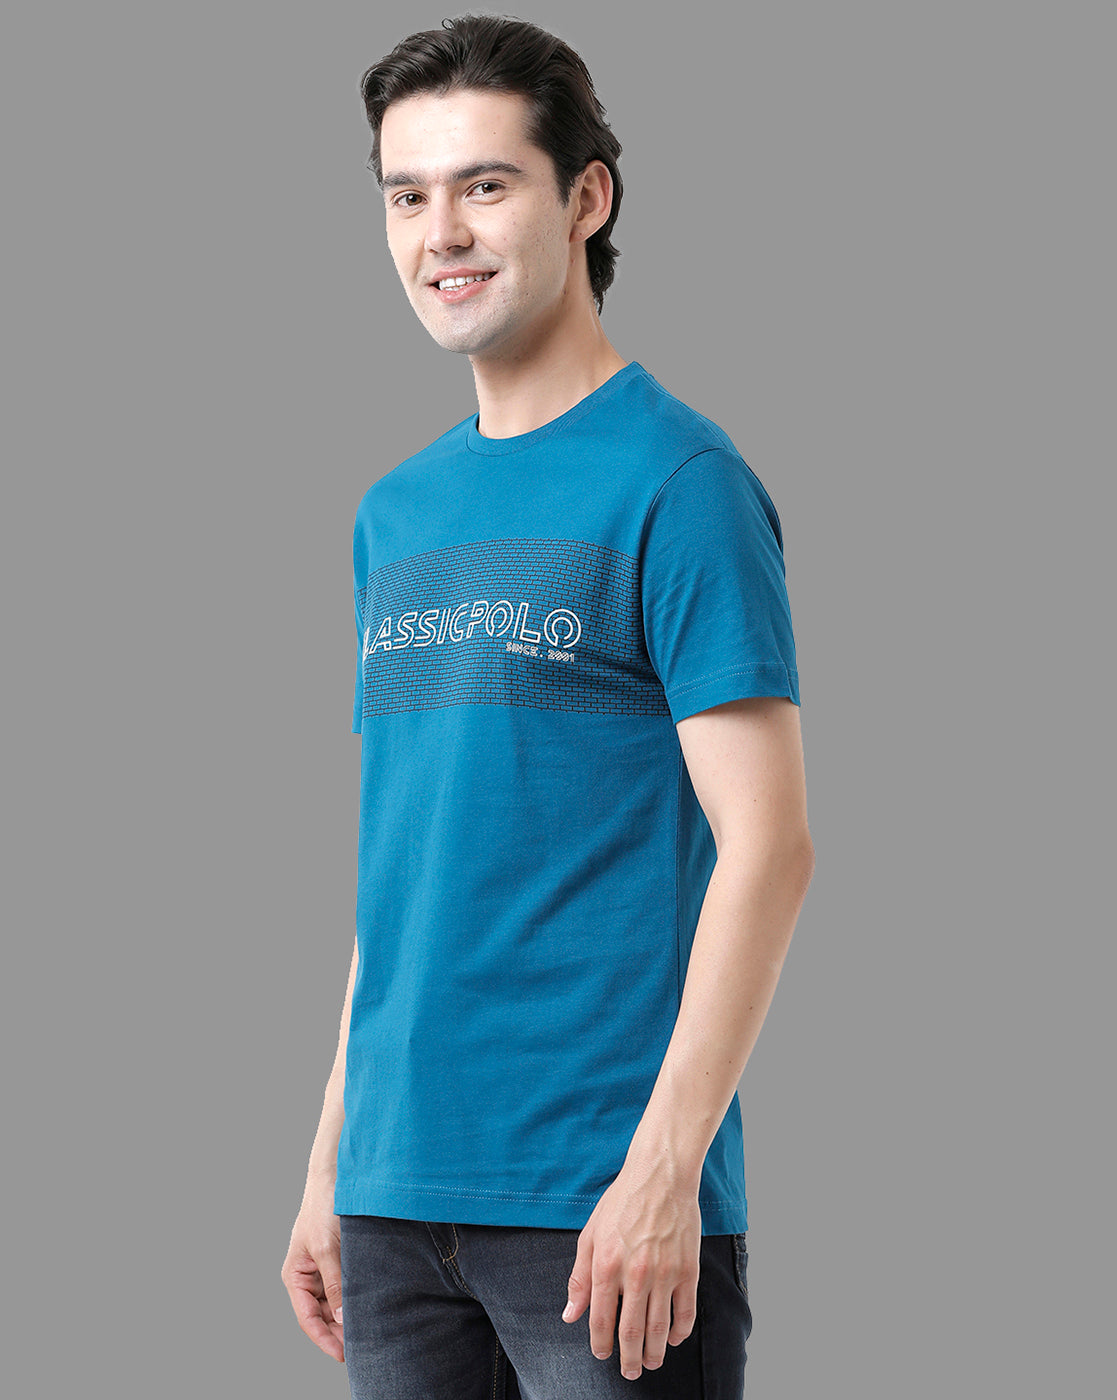 Classic Polo Mens Cotton Half Sleeve Printed Slim Fit Round Neck Blue Color T-Shirt | Baleno - 451 A